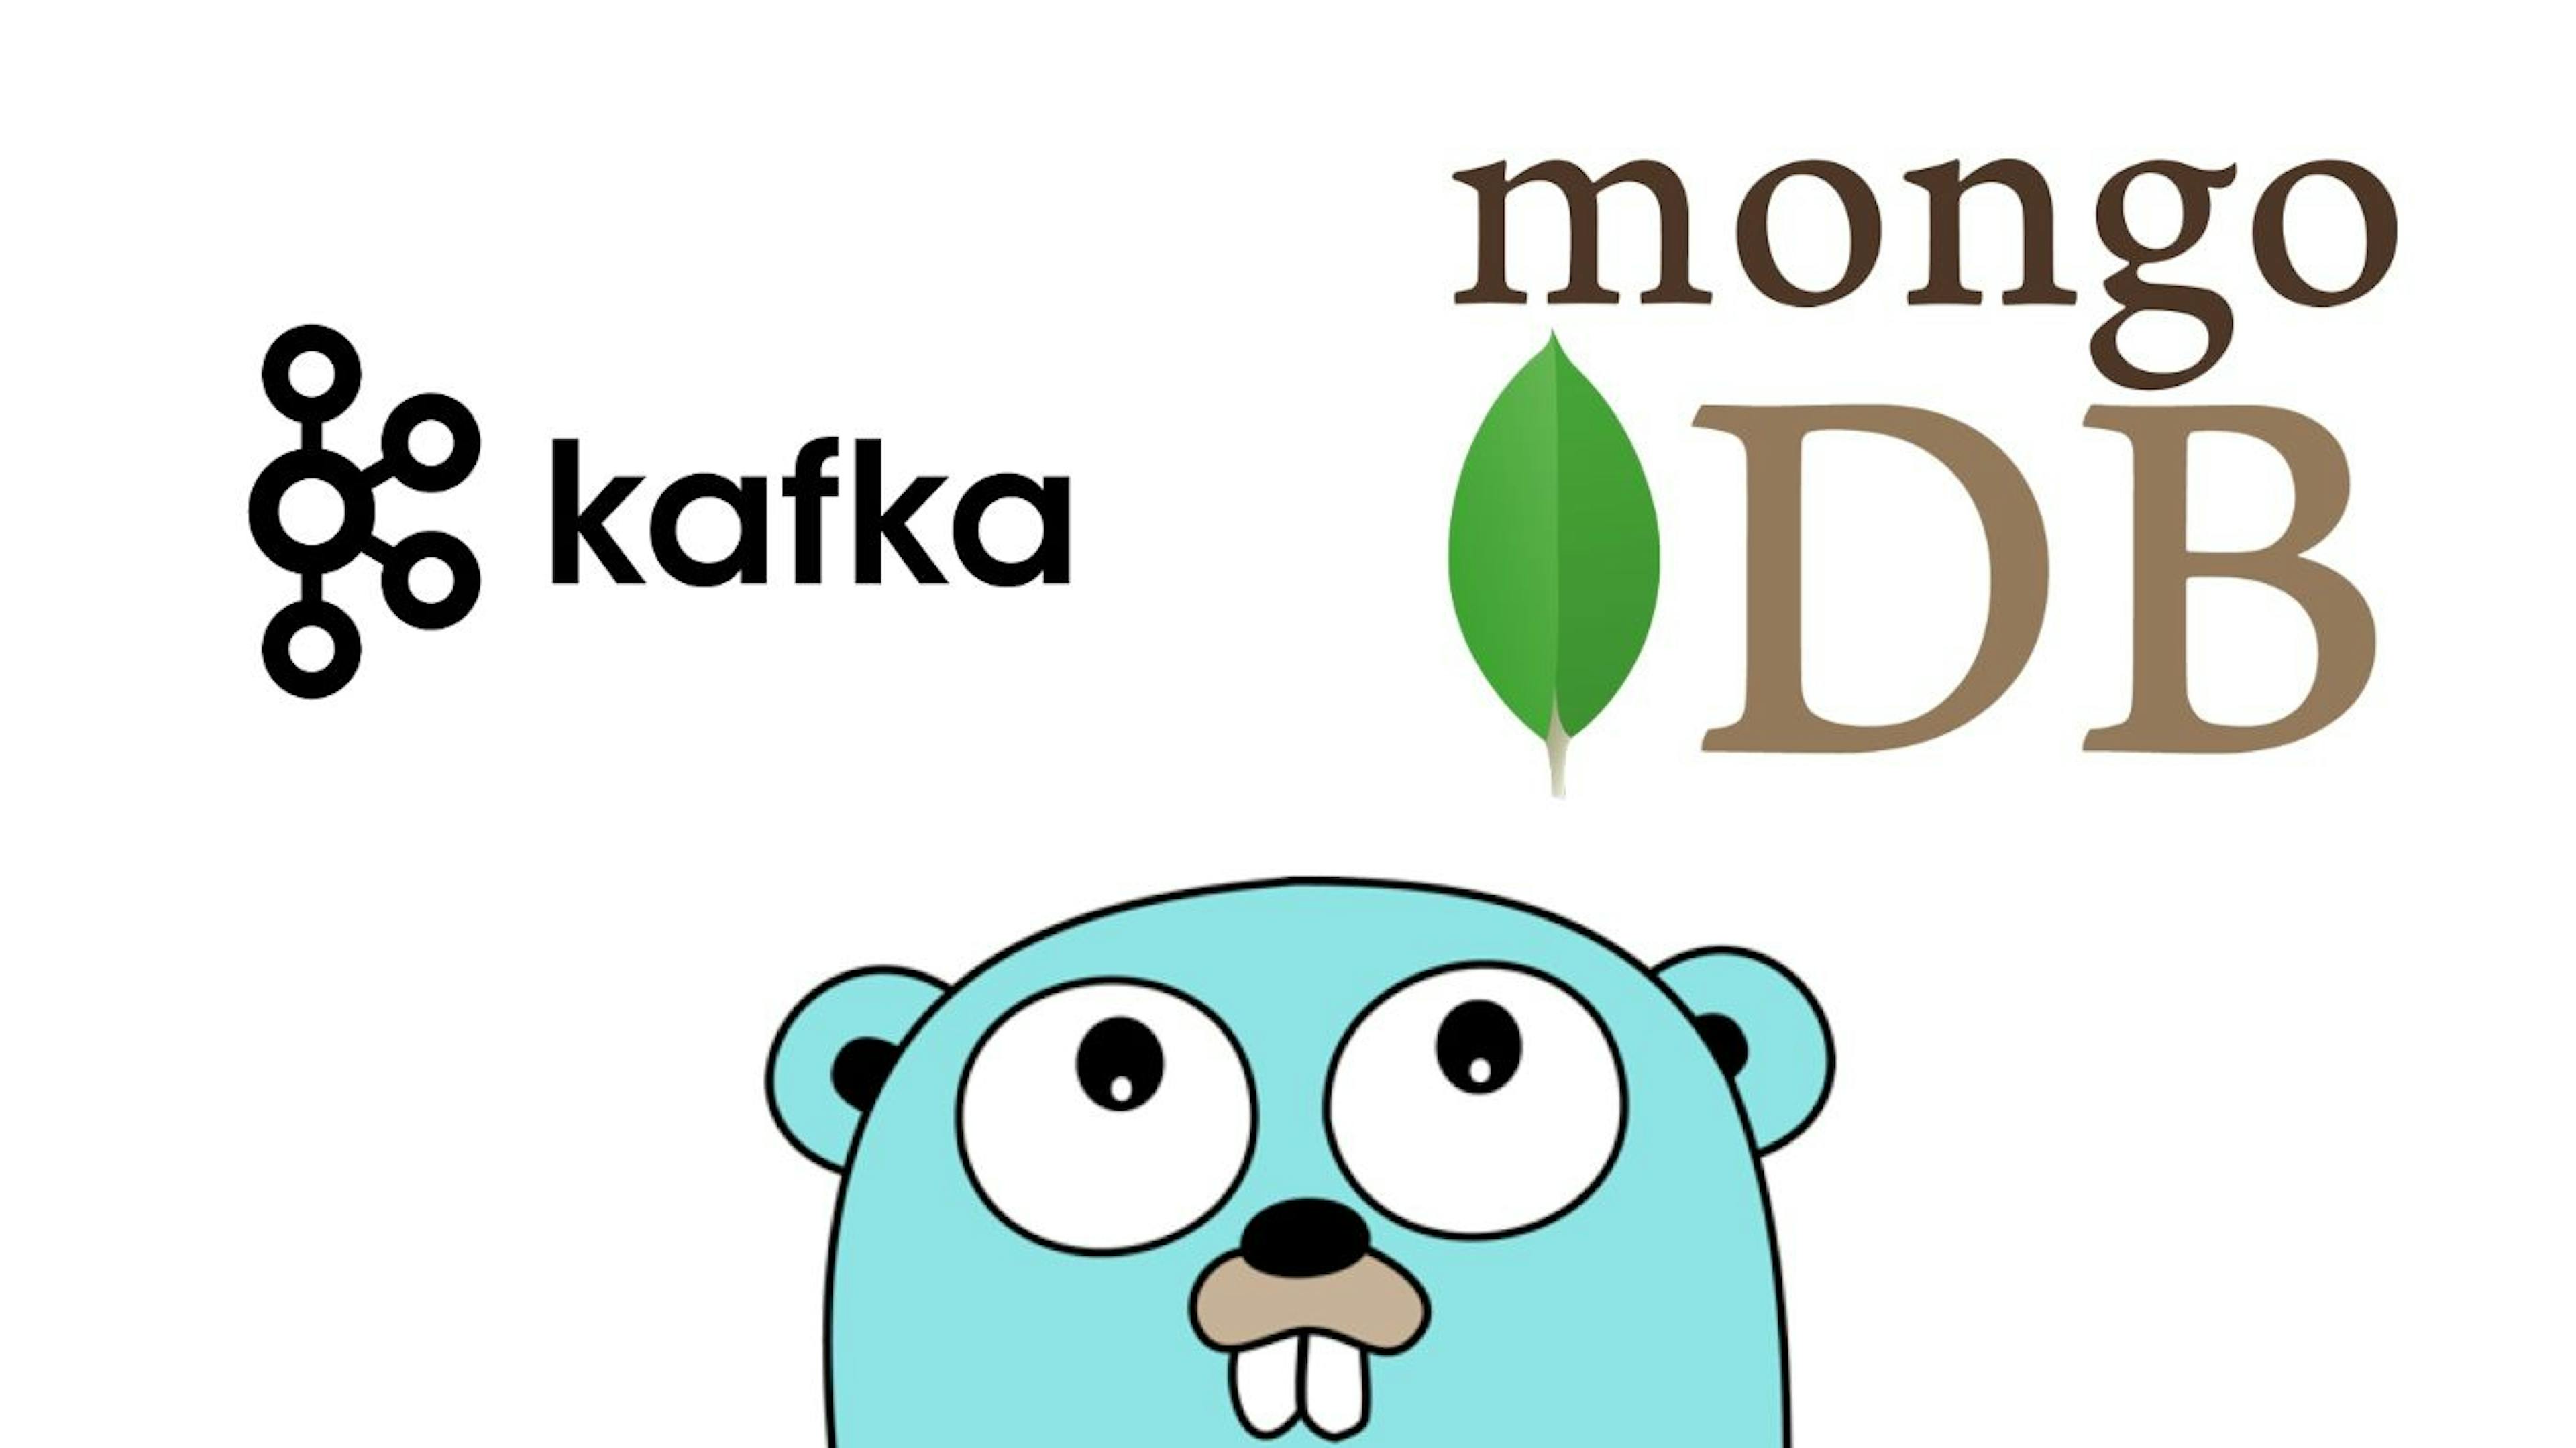 /real-time-data-processing-easily-processing-10-million-messages-with-golang-kafka-and-mongodb feature image